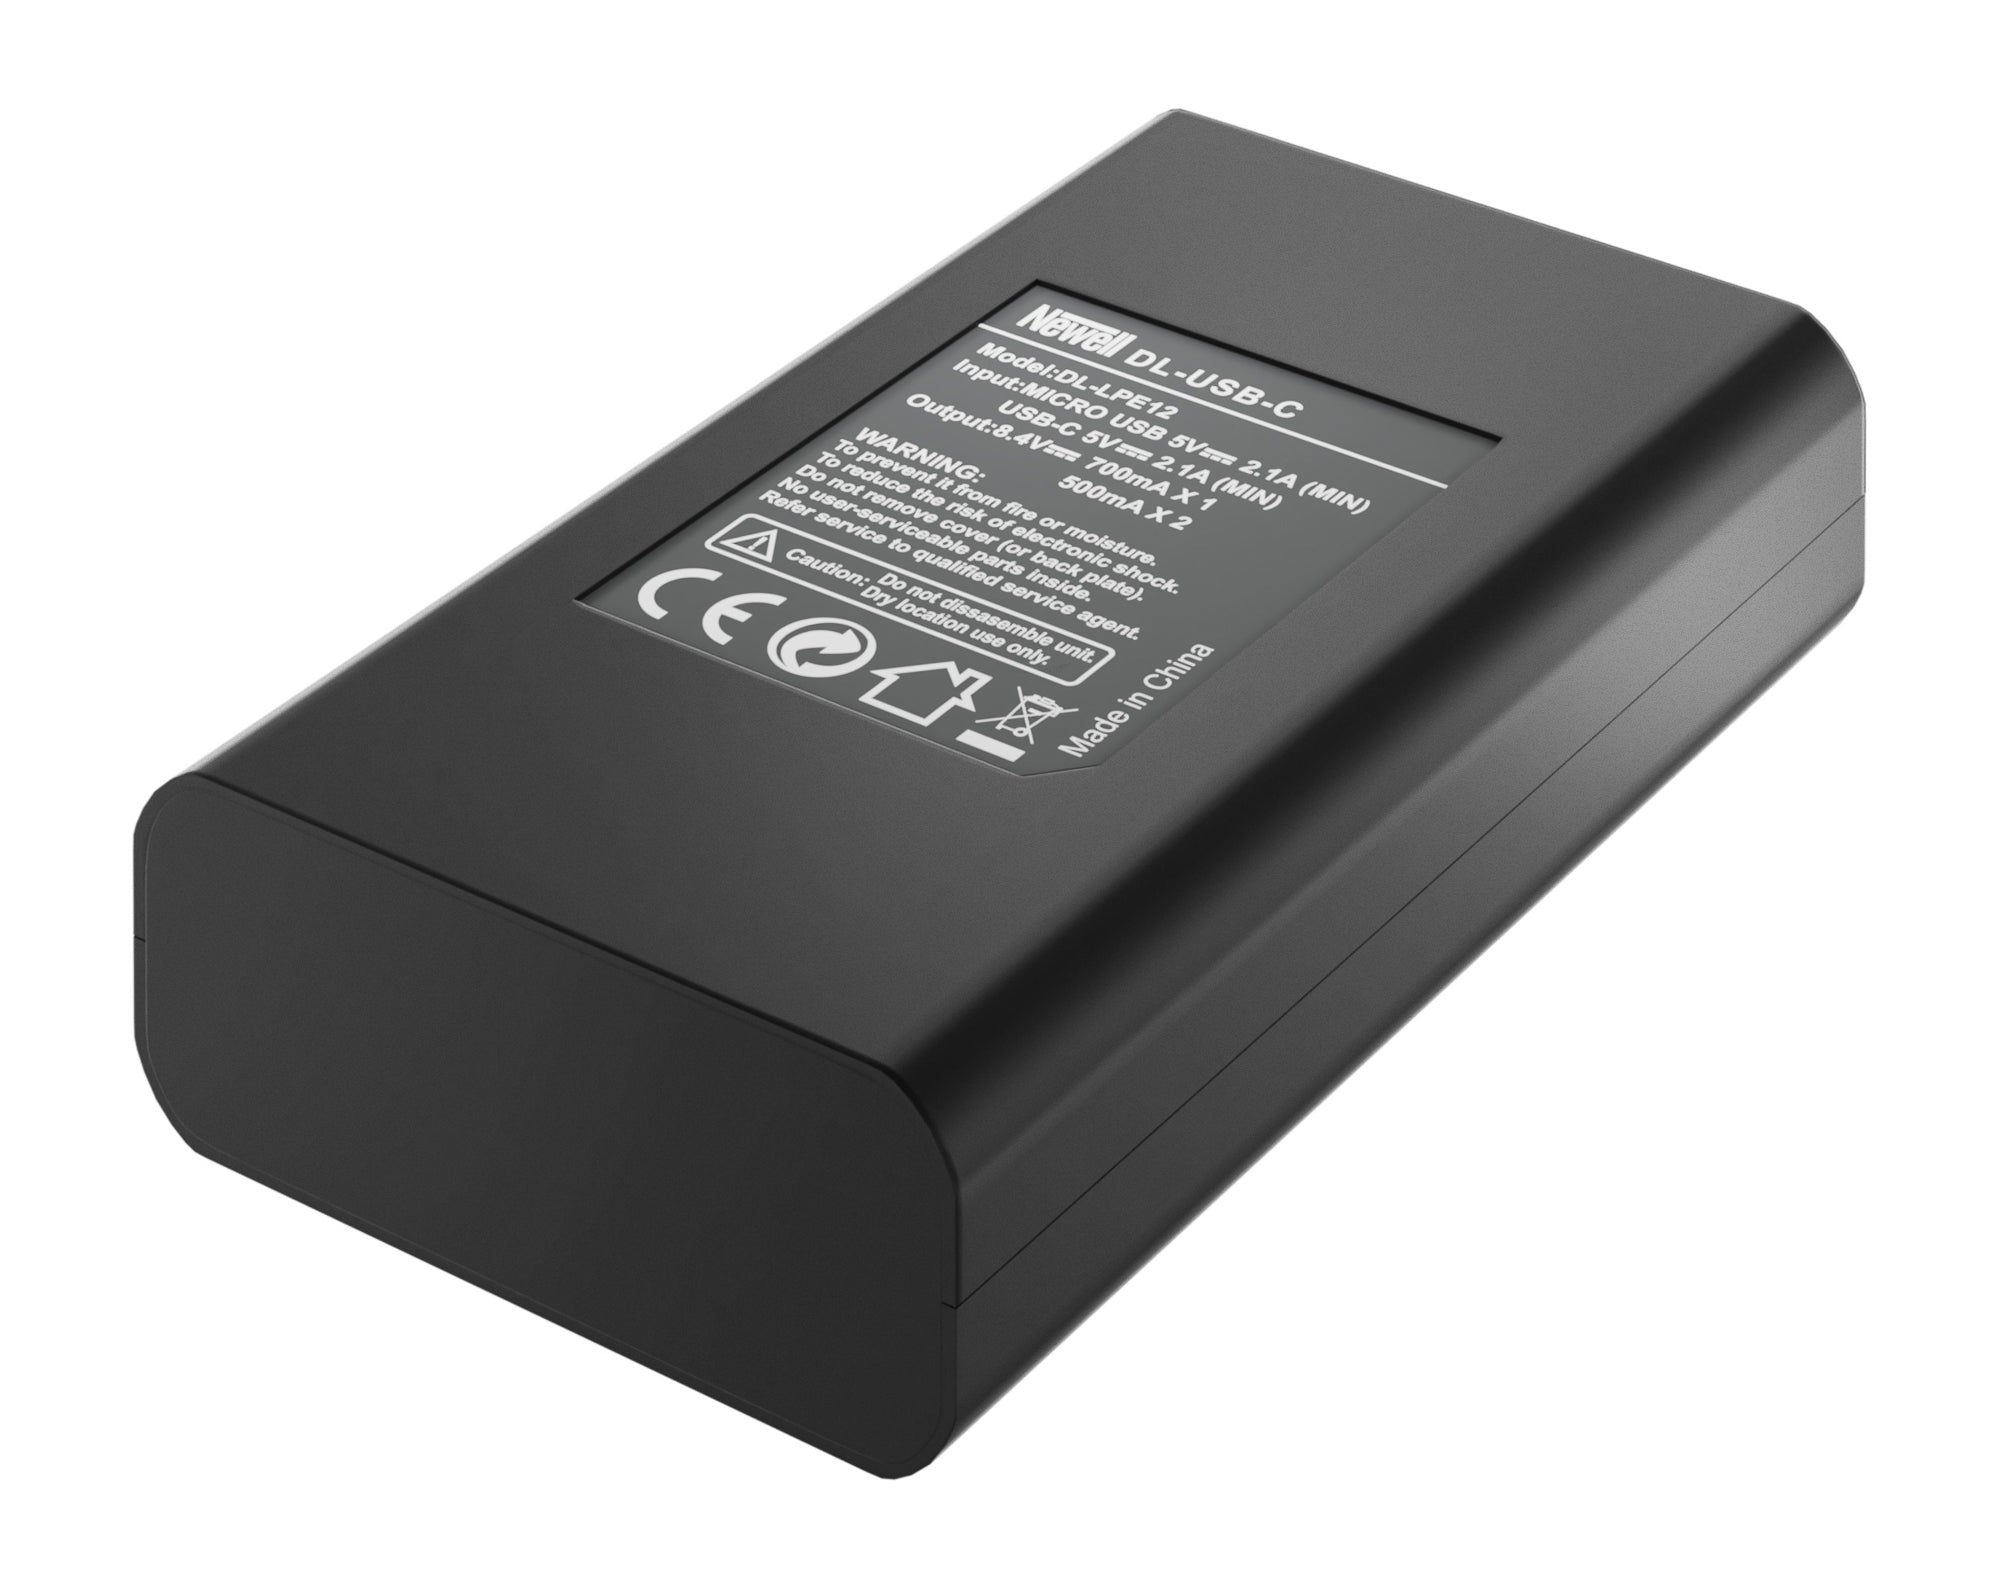 Newell DL-USB-C charger and 2x LP-E12 batteries for Canon